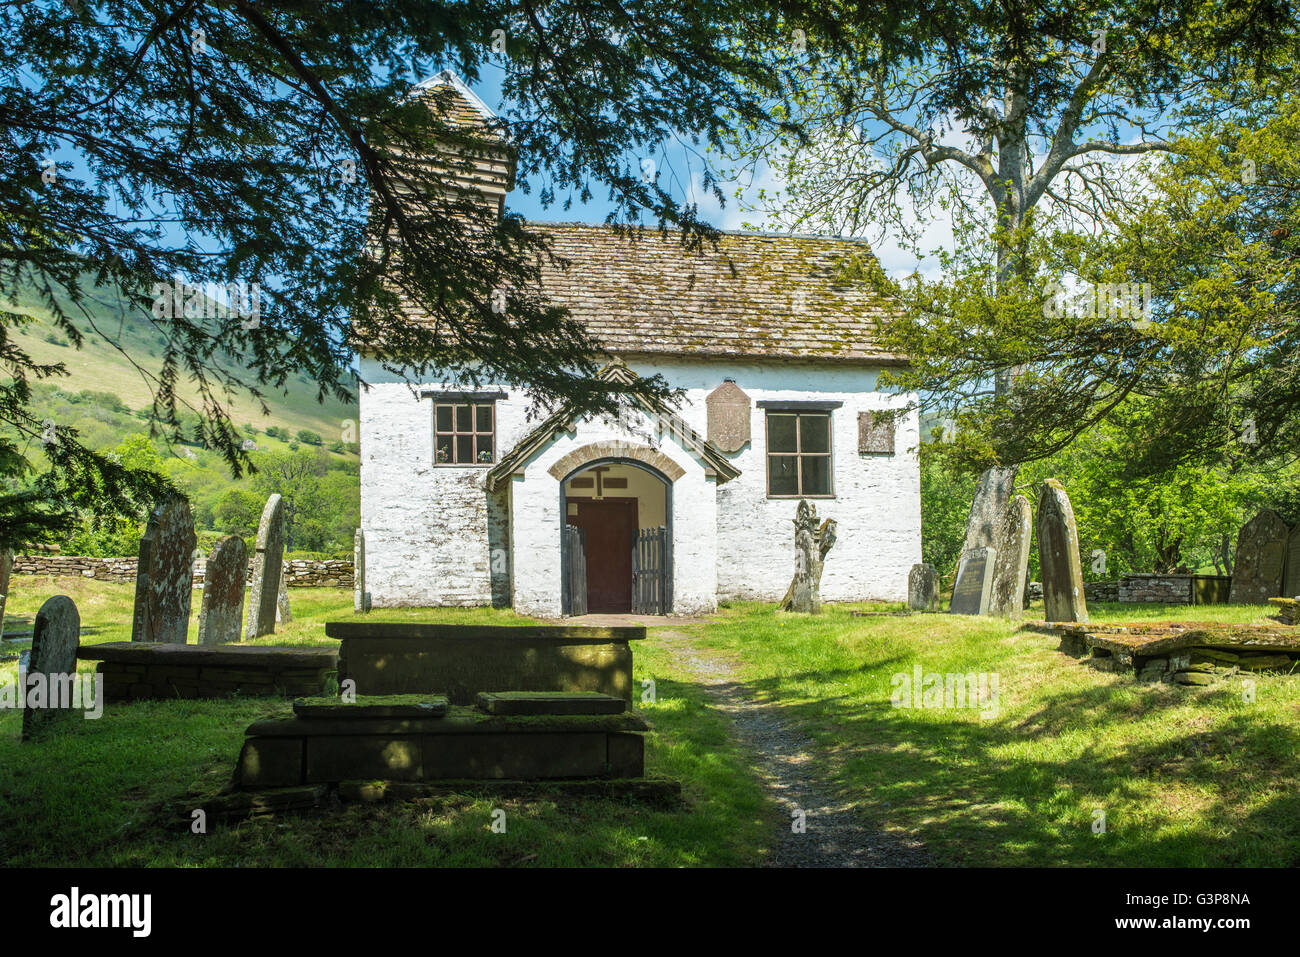 Small whitewashed church / chapel with graveyard in a valley. Stock Photo